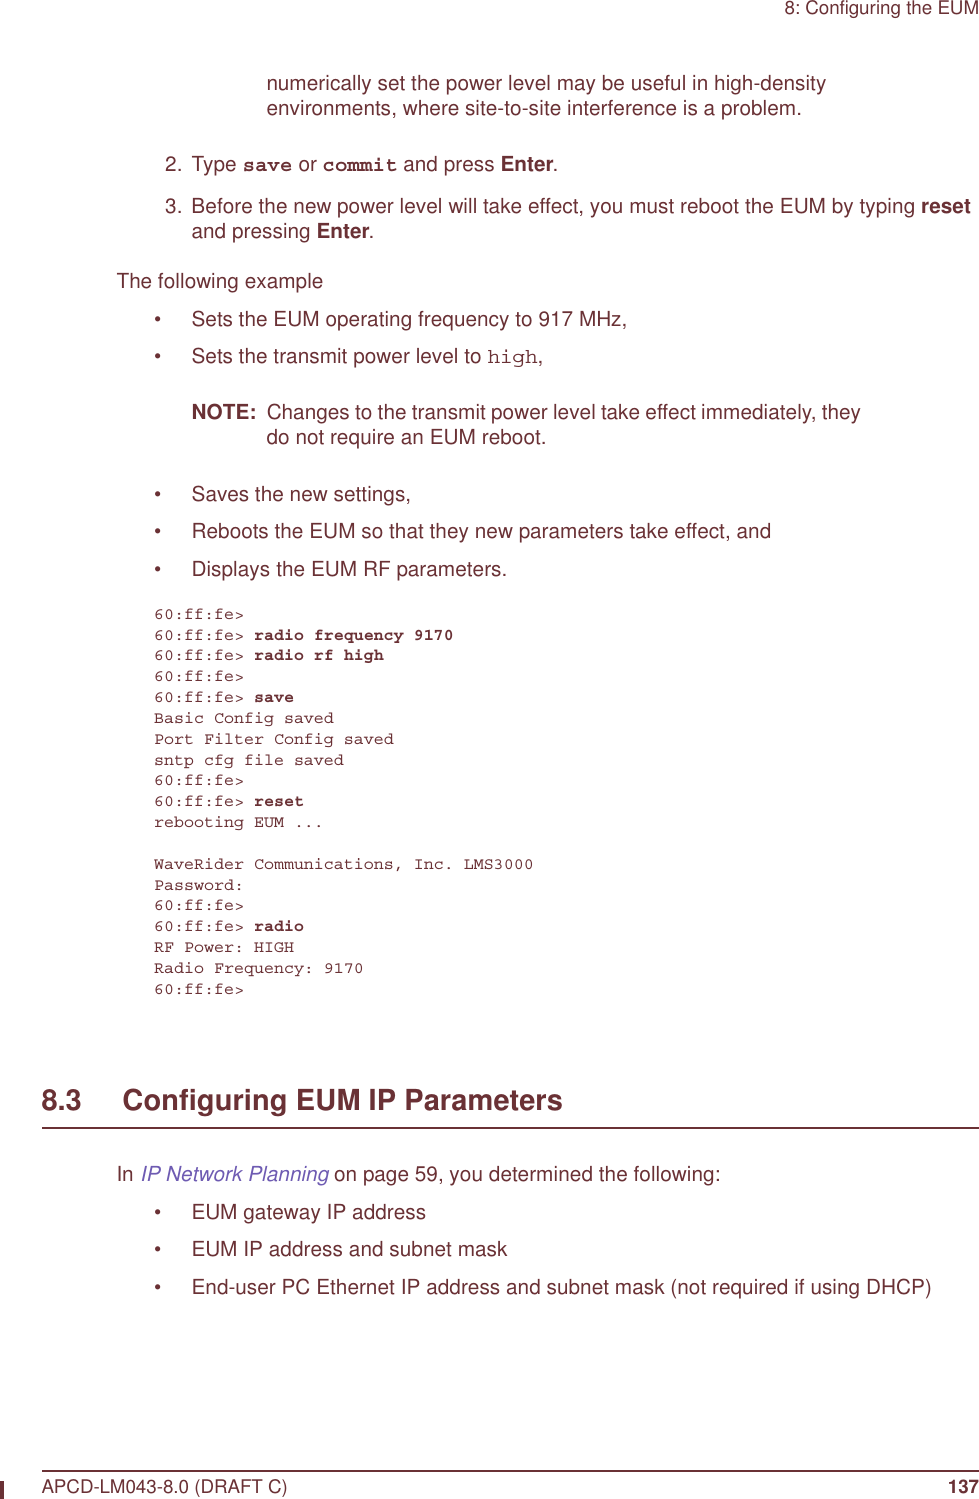 8: Configuring the EUMAPCD-LM043-8.0 (DRAFT C) 137numerically set the power level may be useful in high-density environments, where site-to-site interference is a problem. 2. Type save or commit and press Enter.  3. Before the new power level will take effect, you must reboot the EUM by typing reset and pressing Enter.The following example• Sets the EUM operating frequency to 917 MHz,• Sets the transmit power level to high,NOTE:  Changes to the transmit power level take effect immediately, they do not require an EUM reboot.• Saves the new settings,• Reboots the EUM so that they new parameters take effect, and • Displays the EUM RF parameters.60:ff:fe&gt;60:ff:fe&gt; radio frequency 917060:ff:fe&gt; radio rf high60:ff:fe&gt;60:ff:fe&gt; saveBasic Config savedPort Filter Config savedsntp cfg file saved60:ff:fe&gt;60:ff:fe&gt; resetrebooting EUM ...WaveRider Communications, Inc. LMS3000Password:60:ff:fe&gt;60:ff:fe&gt; radioRF Power: HIGHRadio Frequency: 917060:ff:fe&gt;8.3     Configuring EUM IP ParametersIn IP Network Planning on page 59, you determined the following:• EUM gateway IP address • EUM IP address and subnet mask• End-user PC Ethernet IP address and subnet mask (not required if using DHCP)